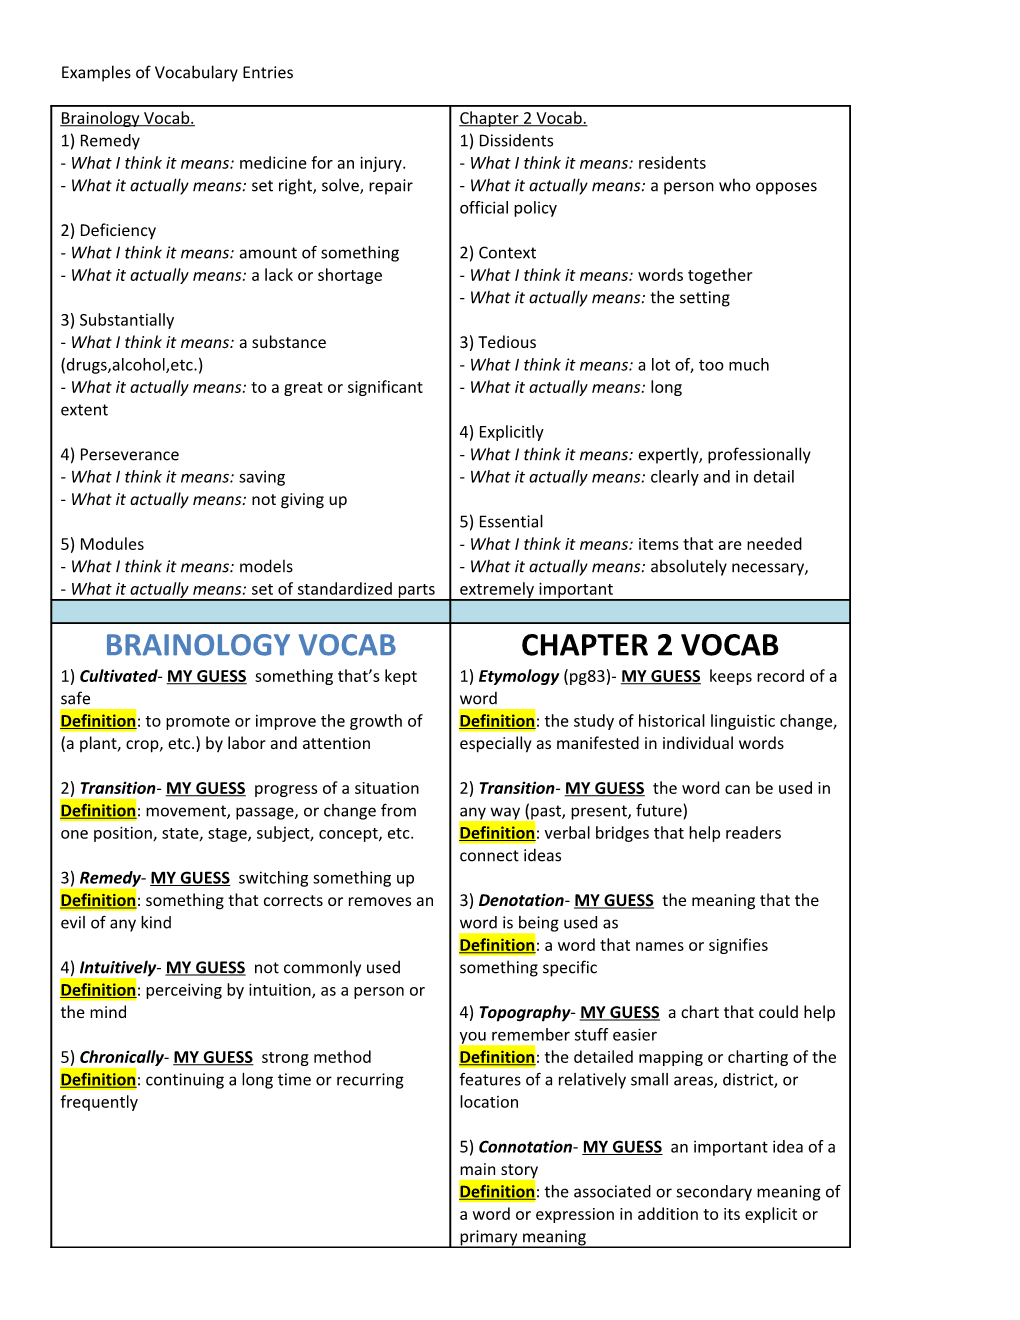 Examples of Vocabulary Entries